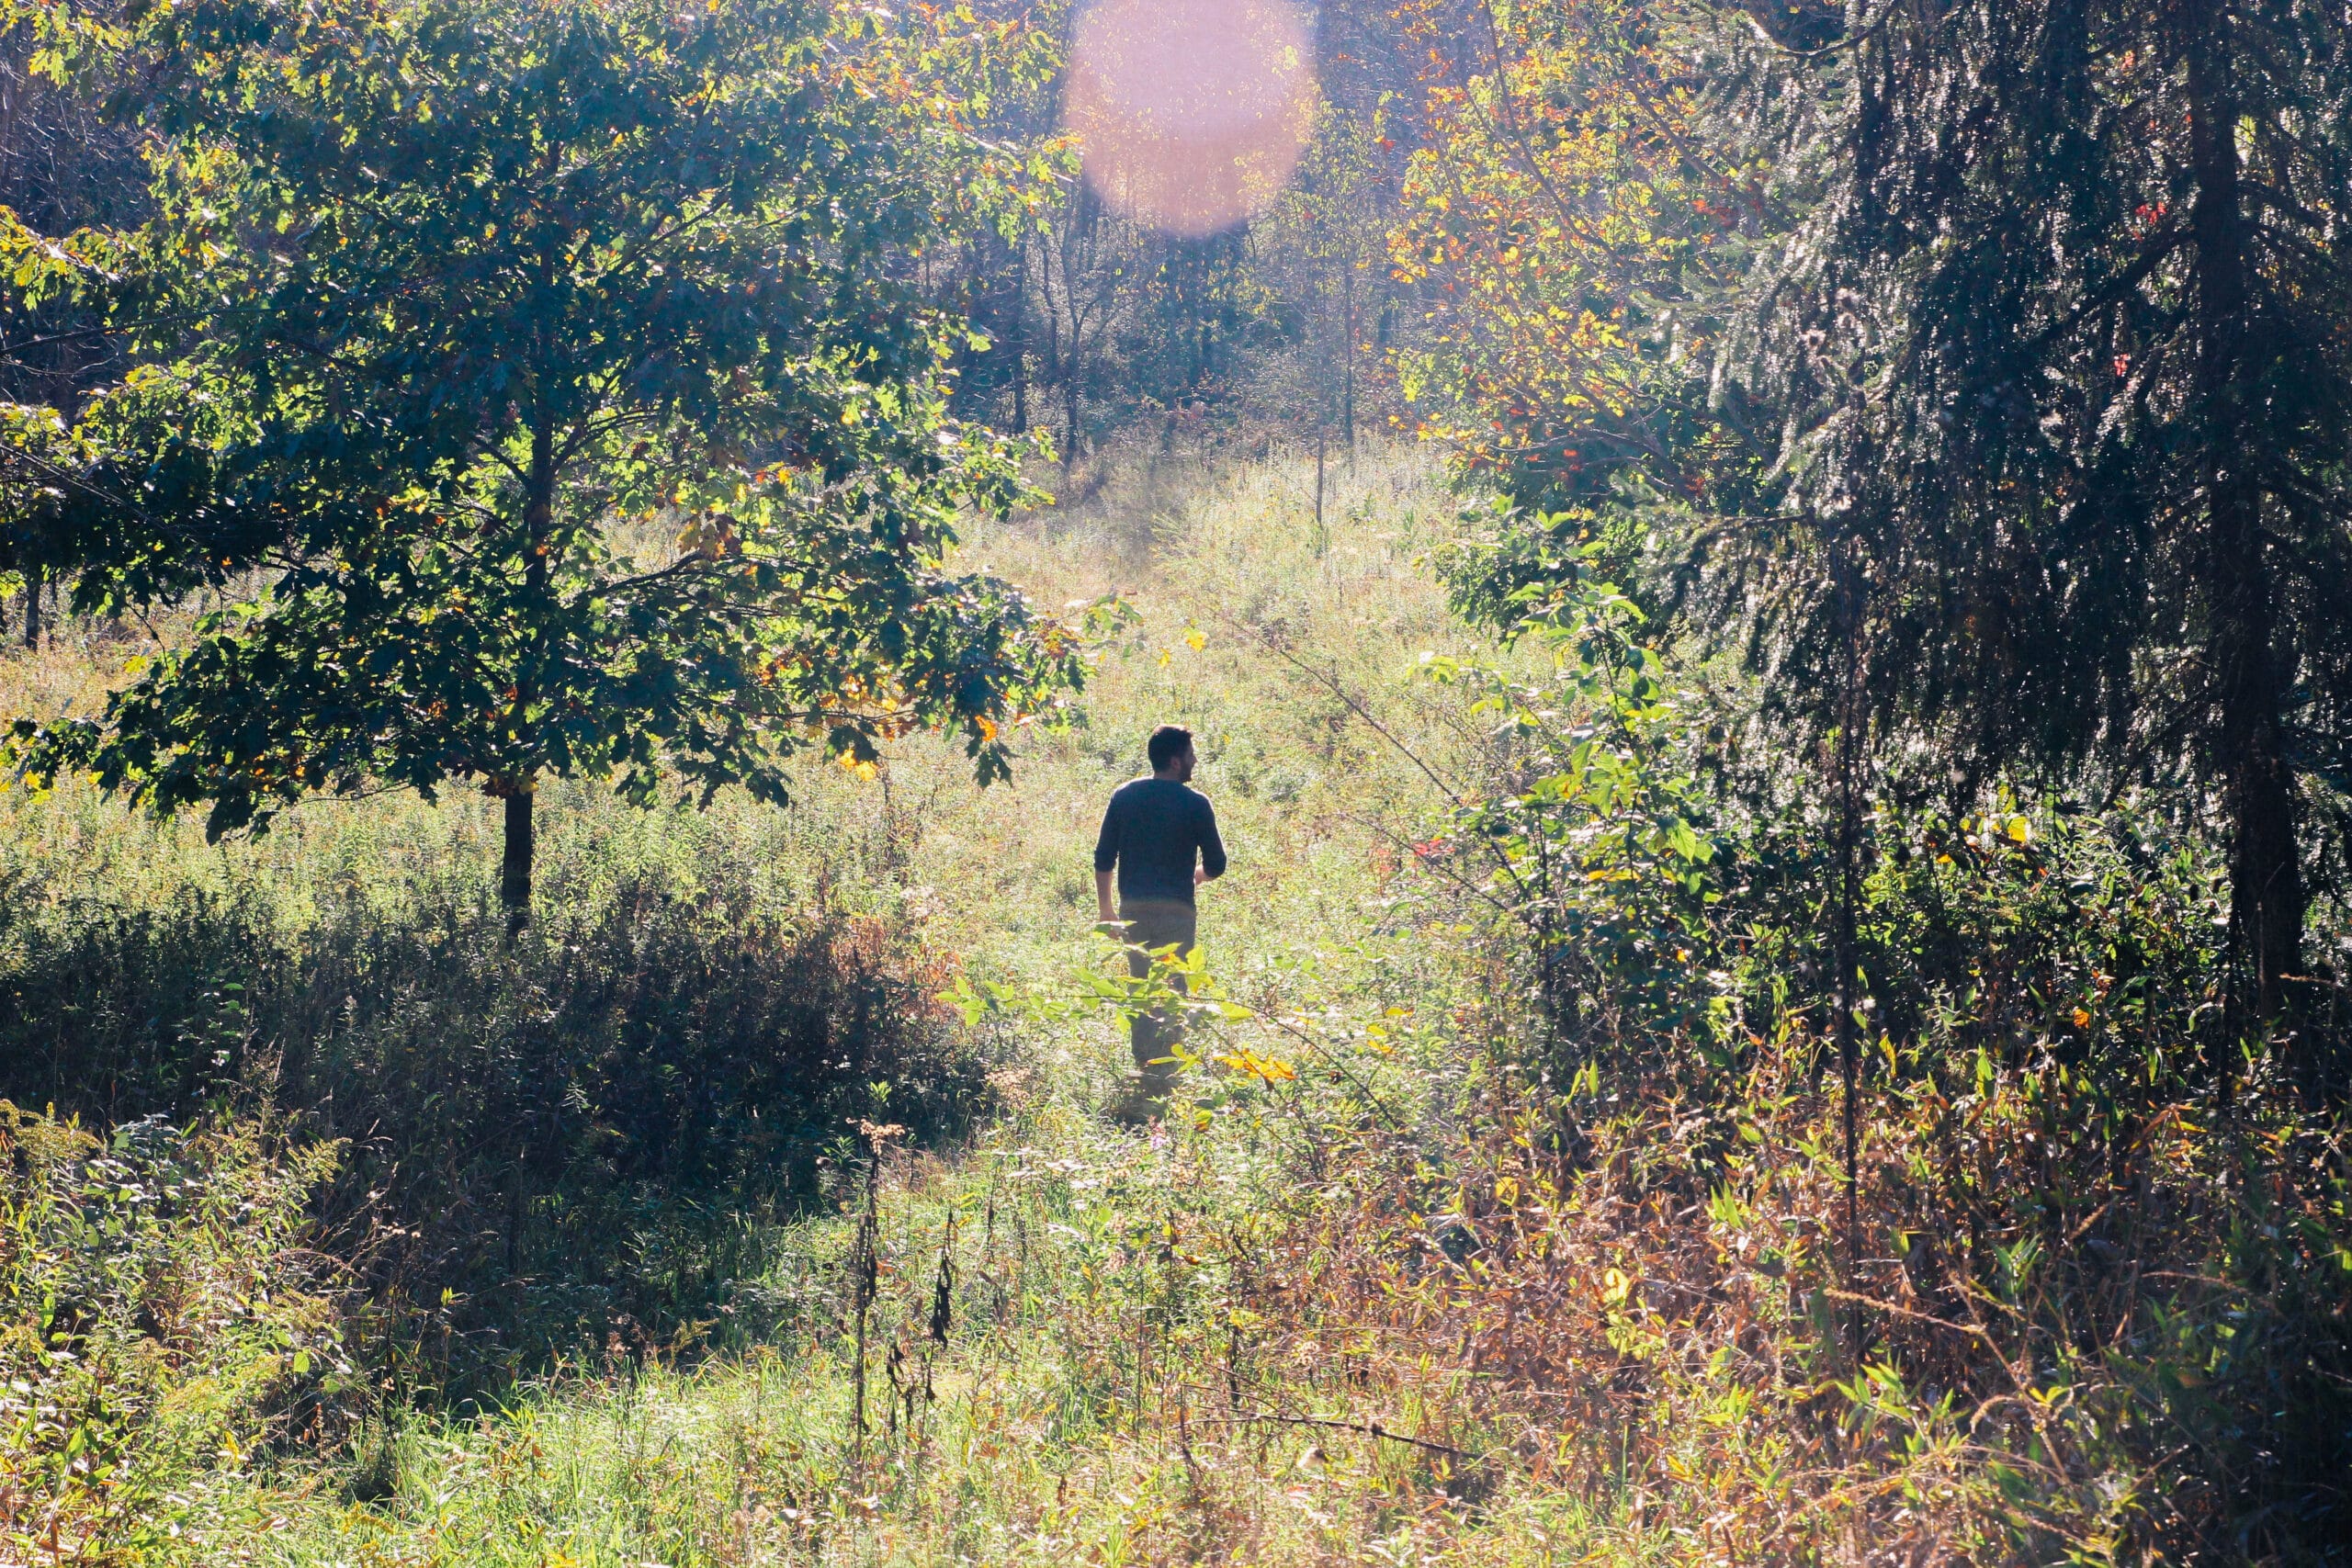 Image of someone walking in a forest.